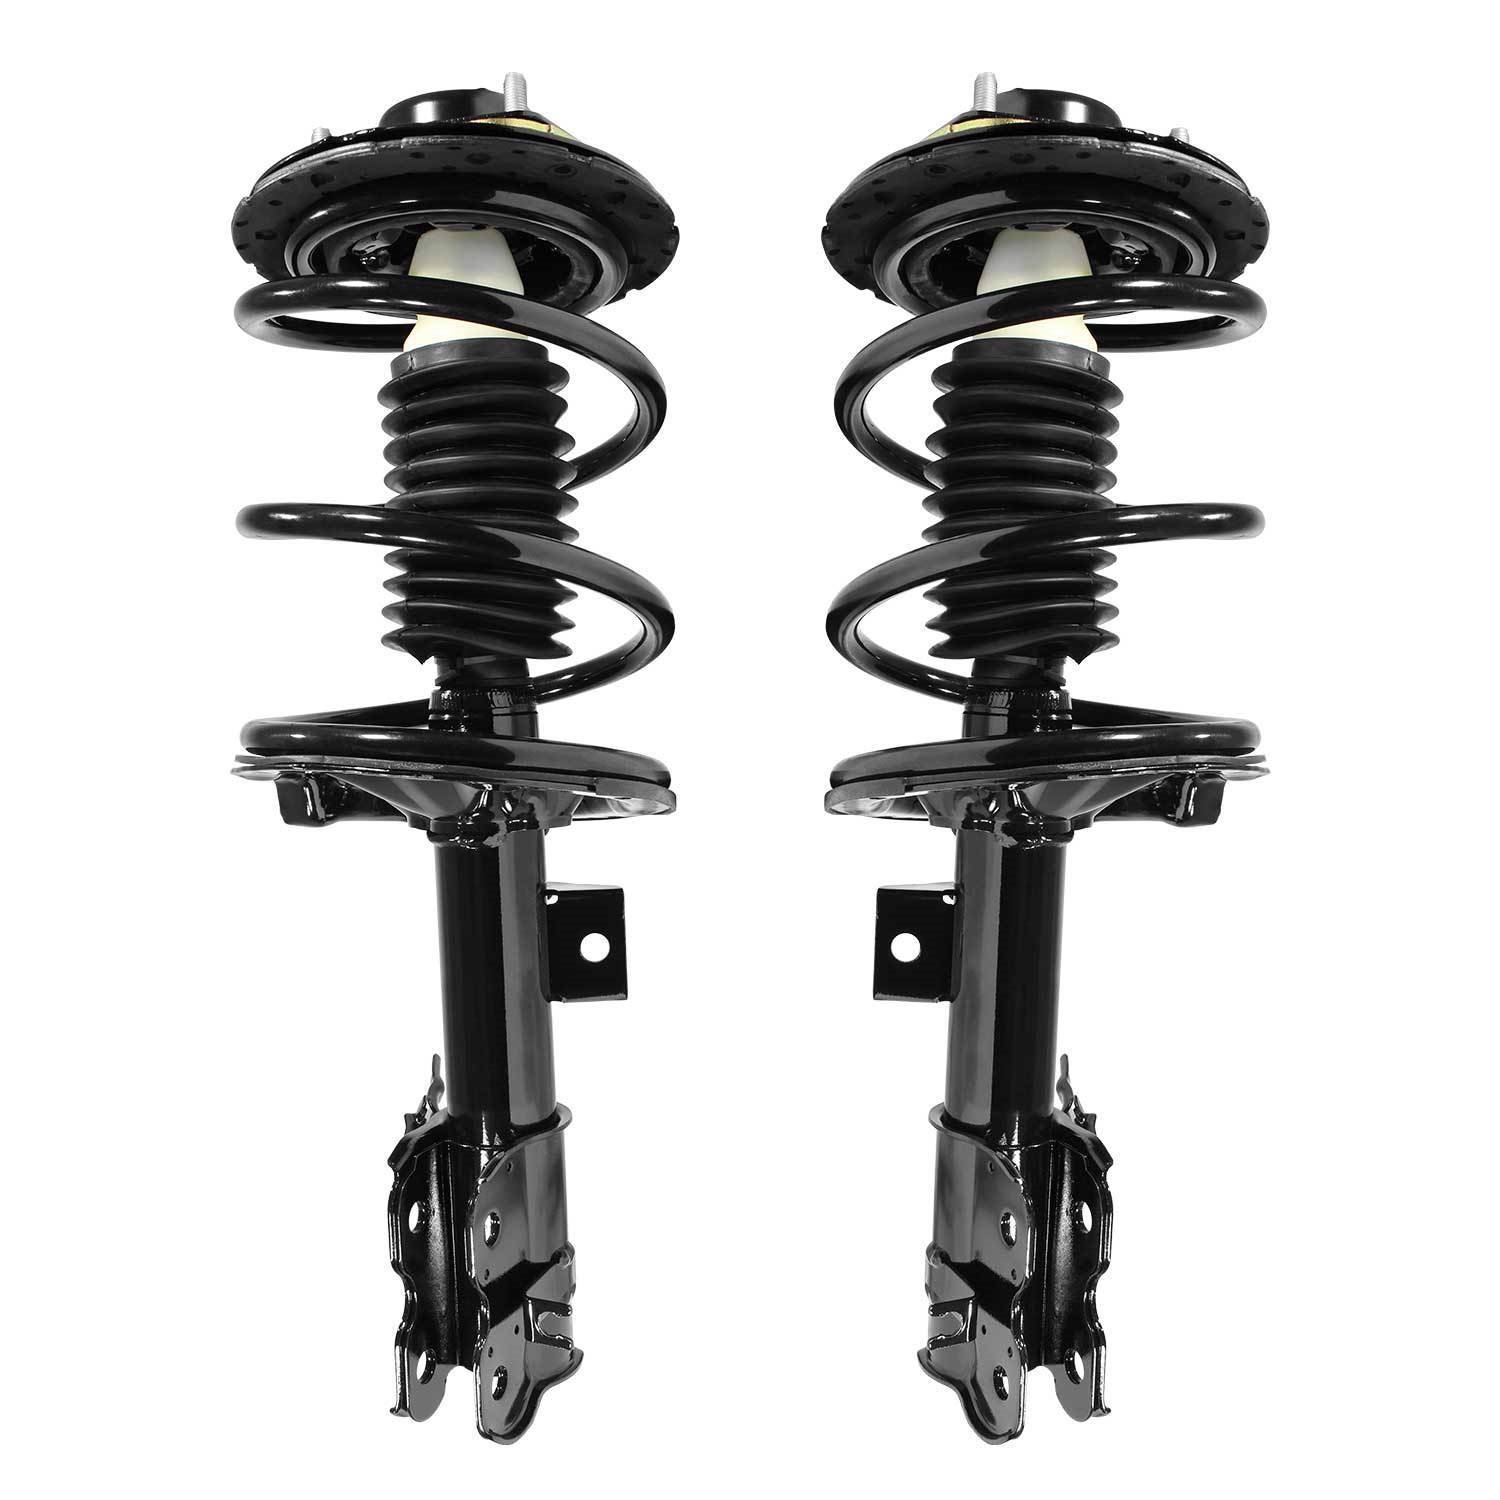 2-11333-11334-001 Suspension Strut & Coil Spring Assembly Set Fits Select Nissan Maxima